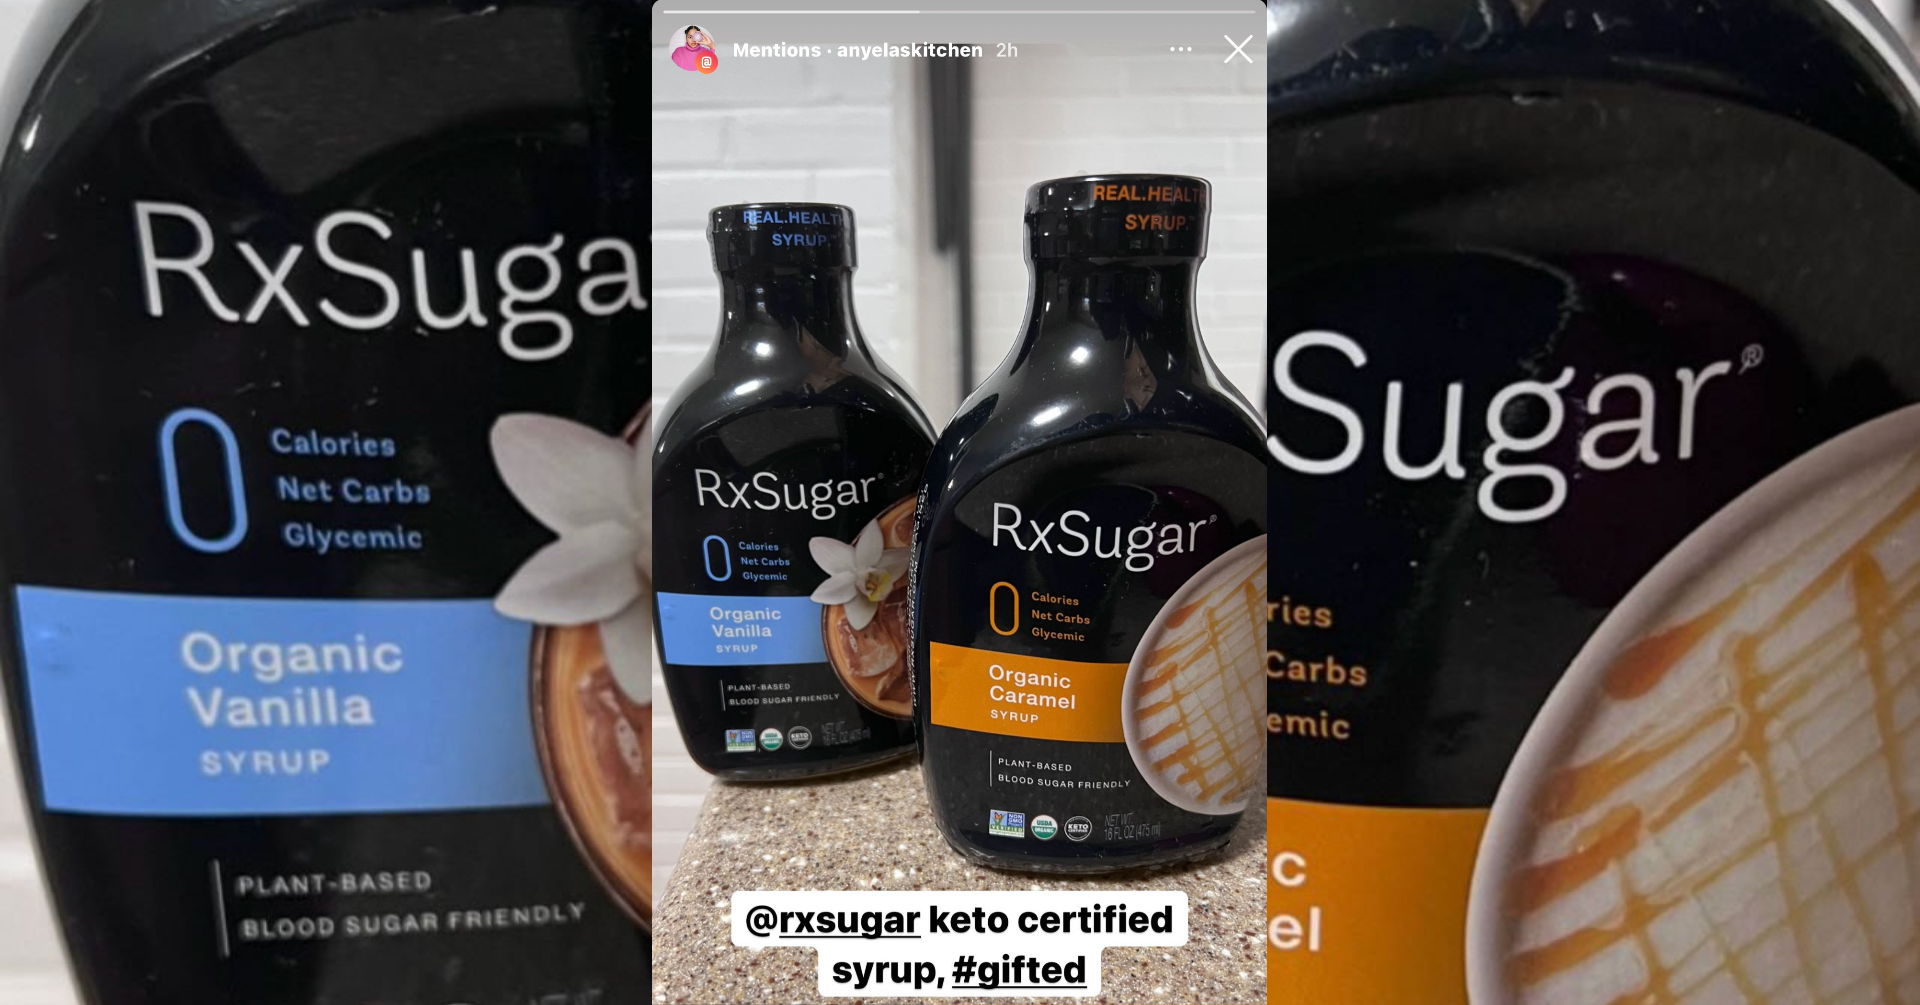 Anyelya's Kitchen Getting Her New RxSugar Package!